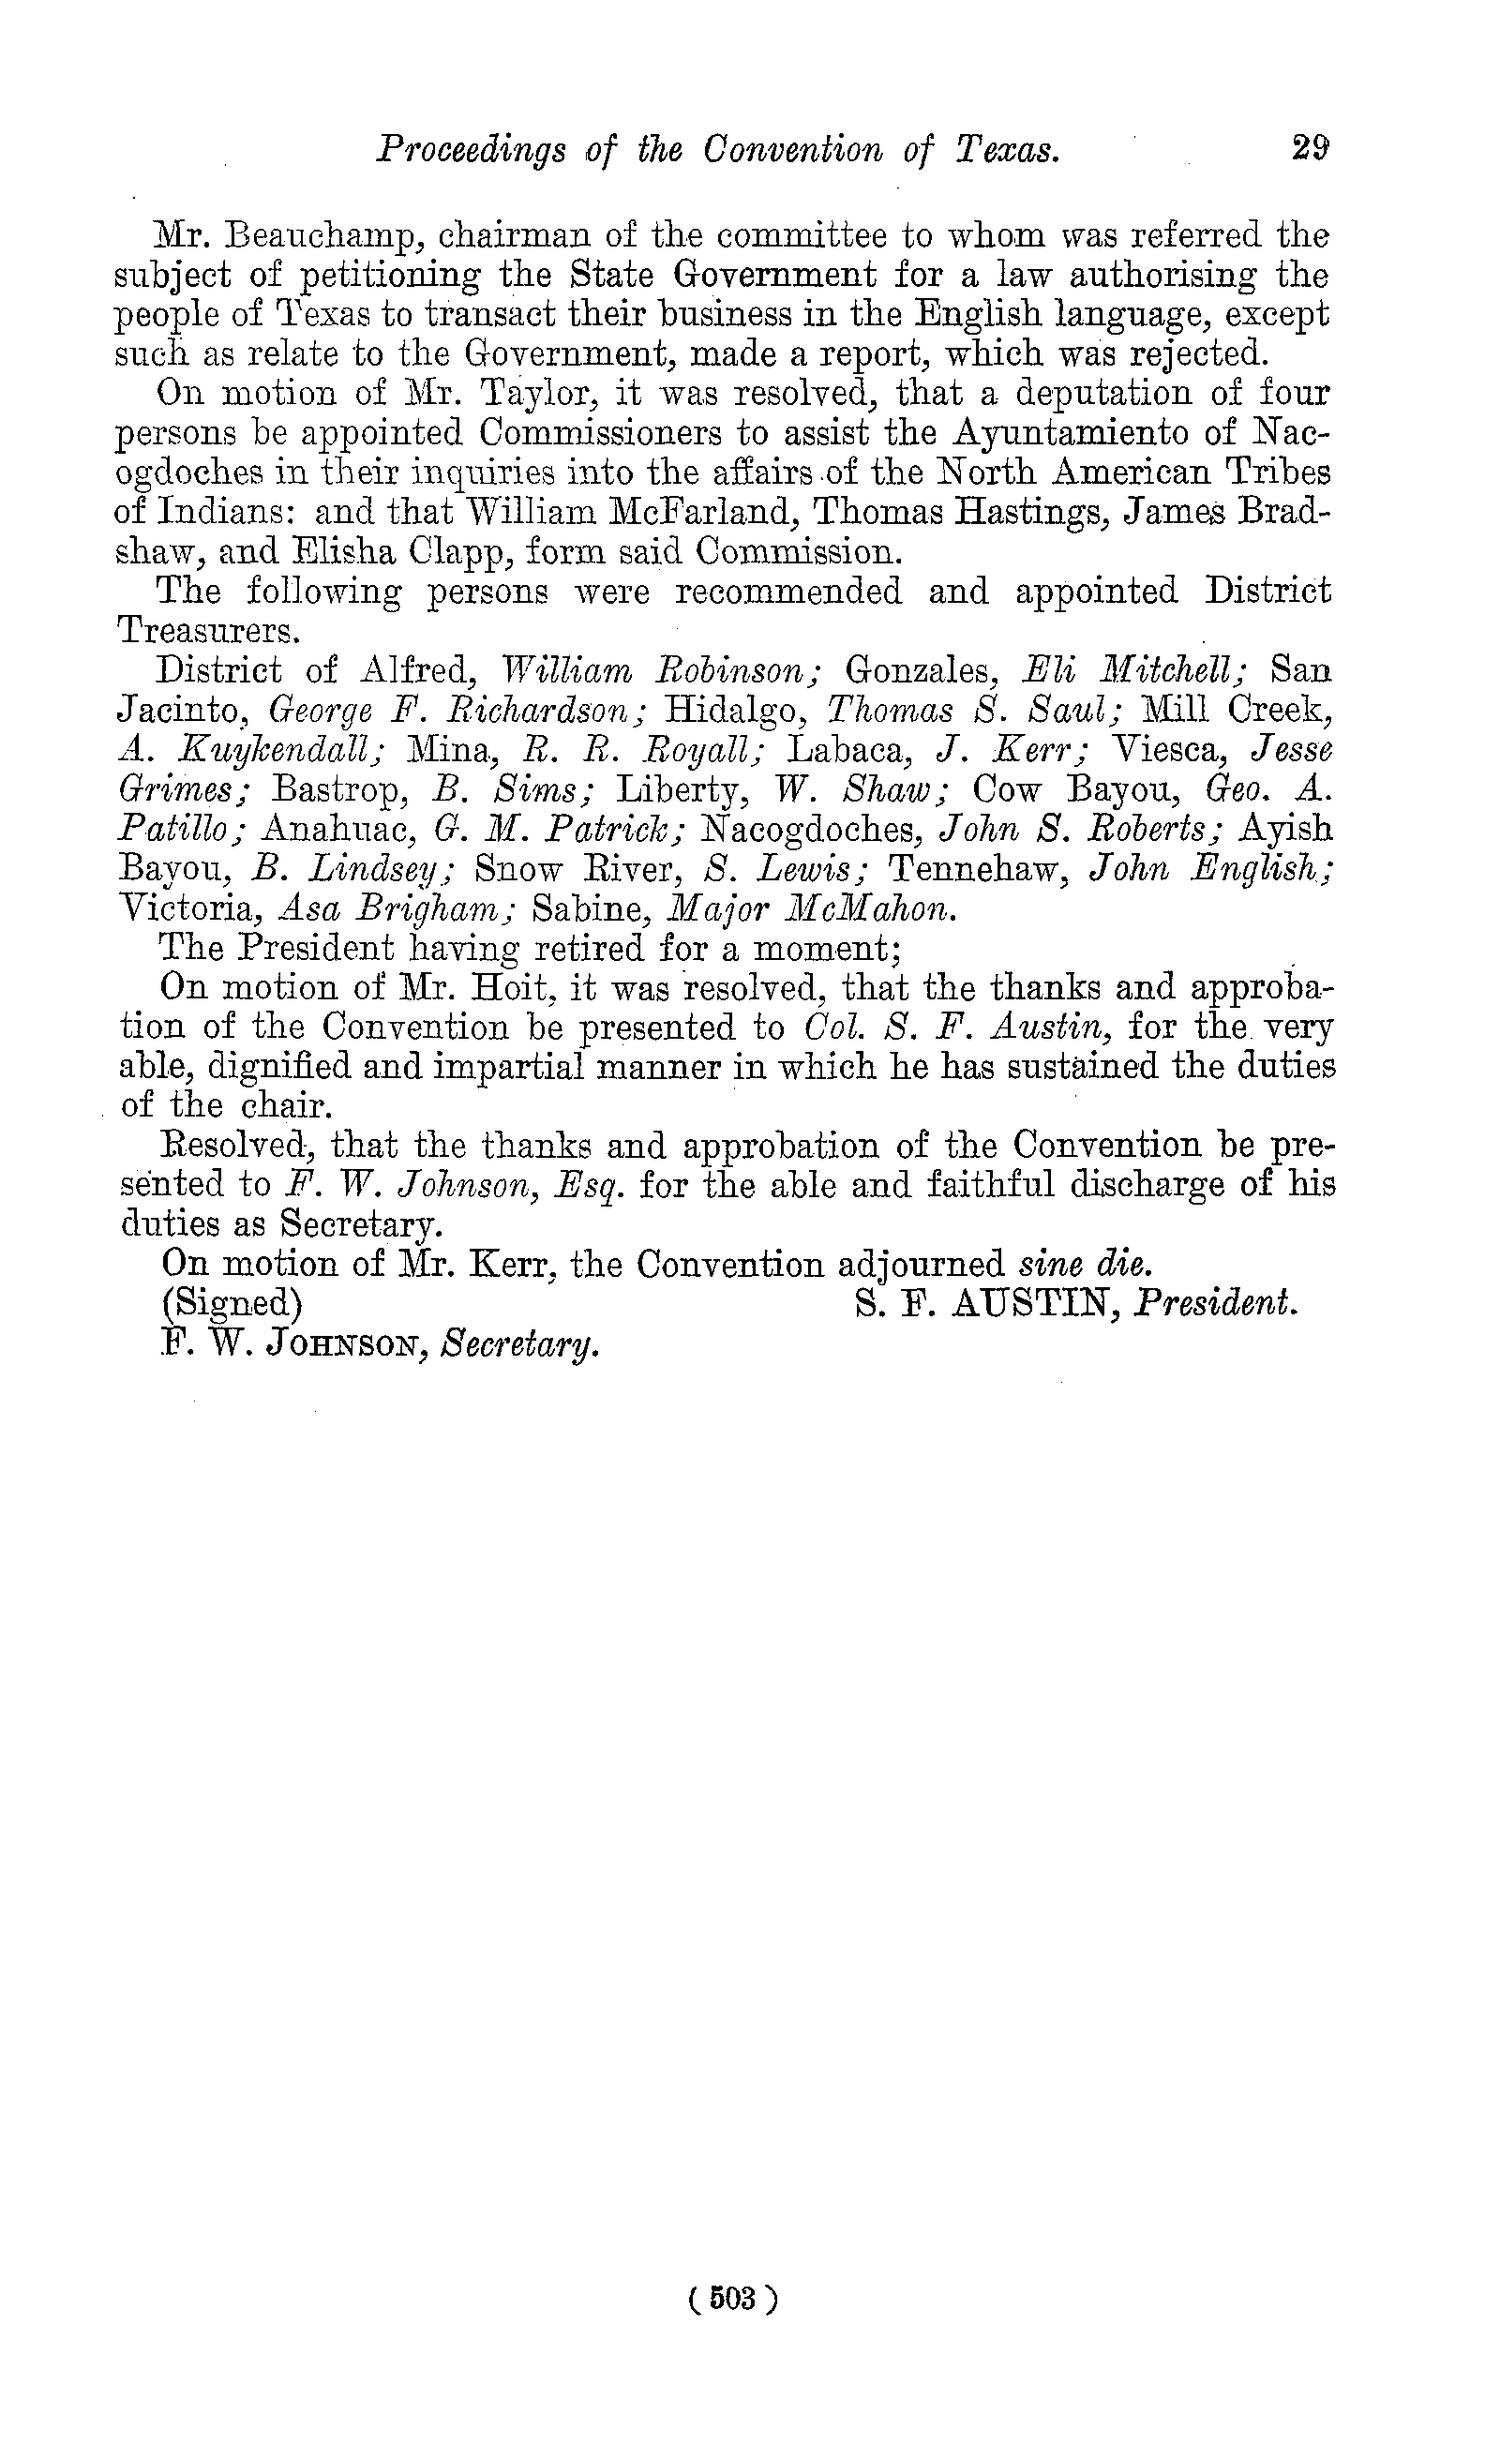 The Laws of Texas, 1822-1897 Volume 1
                                                
                                                    503
                                                